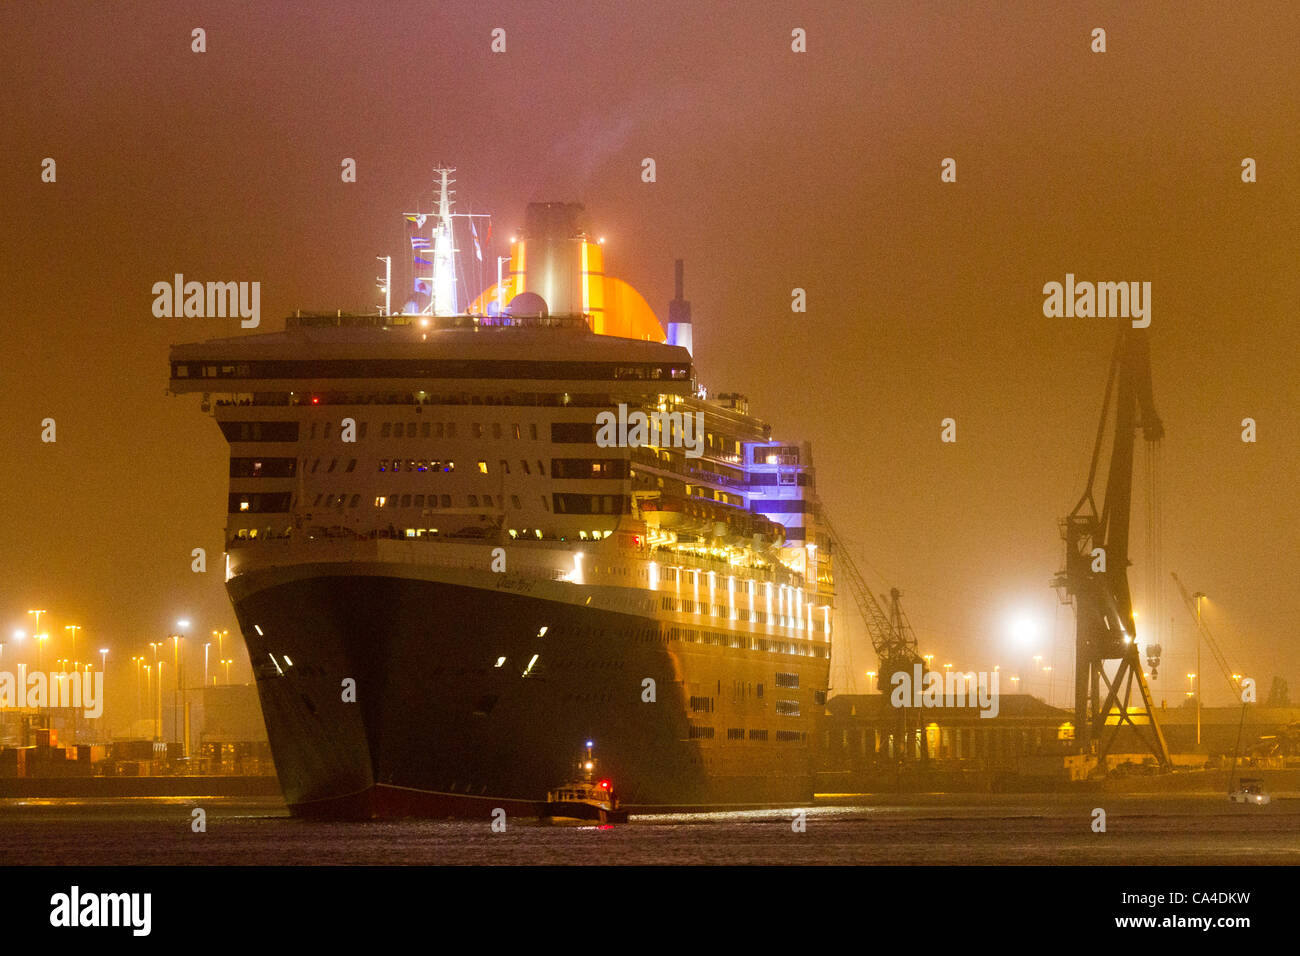 SOUTHAMPTON, UK, 5th June 2012. The Queen Mary 2 turns in Southampton dock ahead of the Firework Spectacular as part of the 'Three Queens' event during celebrations for Queen Elizabeth II's diamond jubilee. Stock Photo